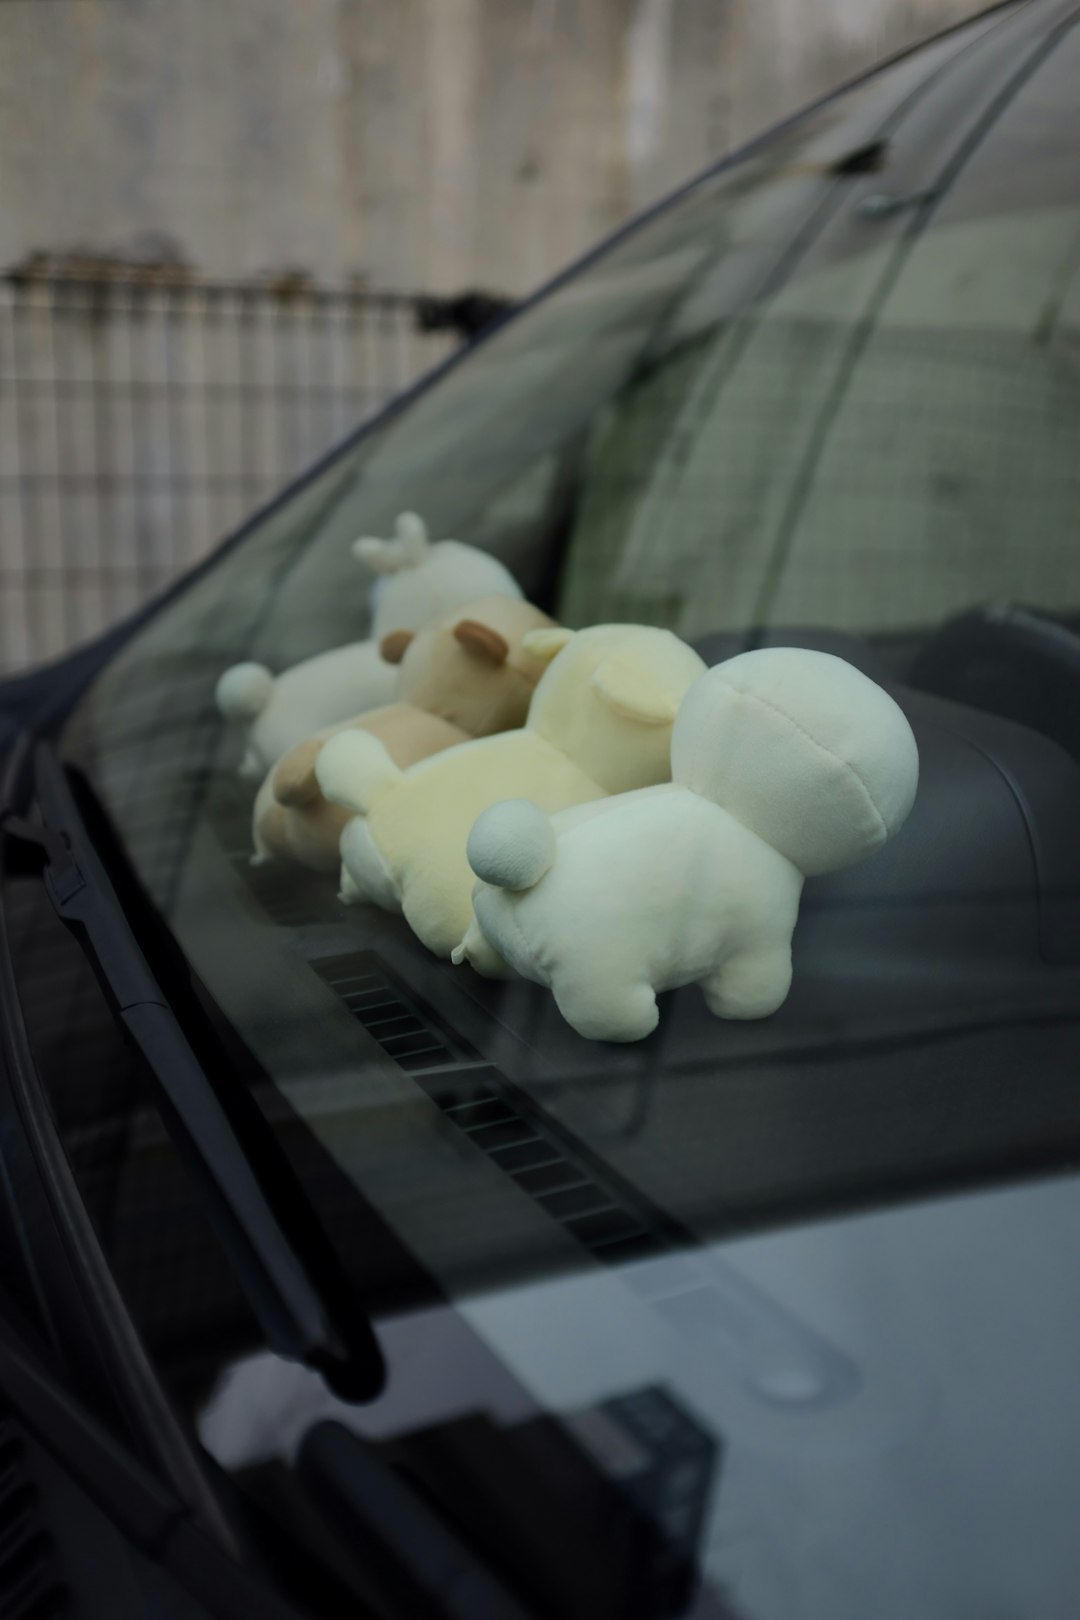 four white and yellow plush toys in vehicle